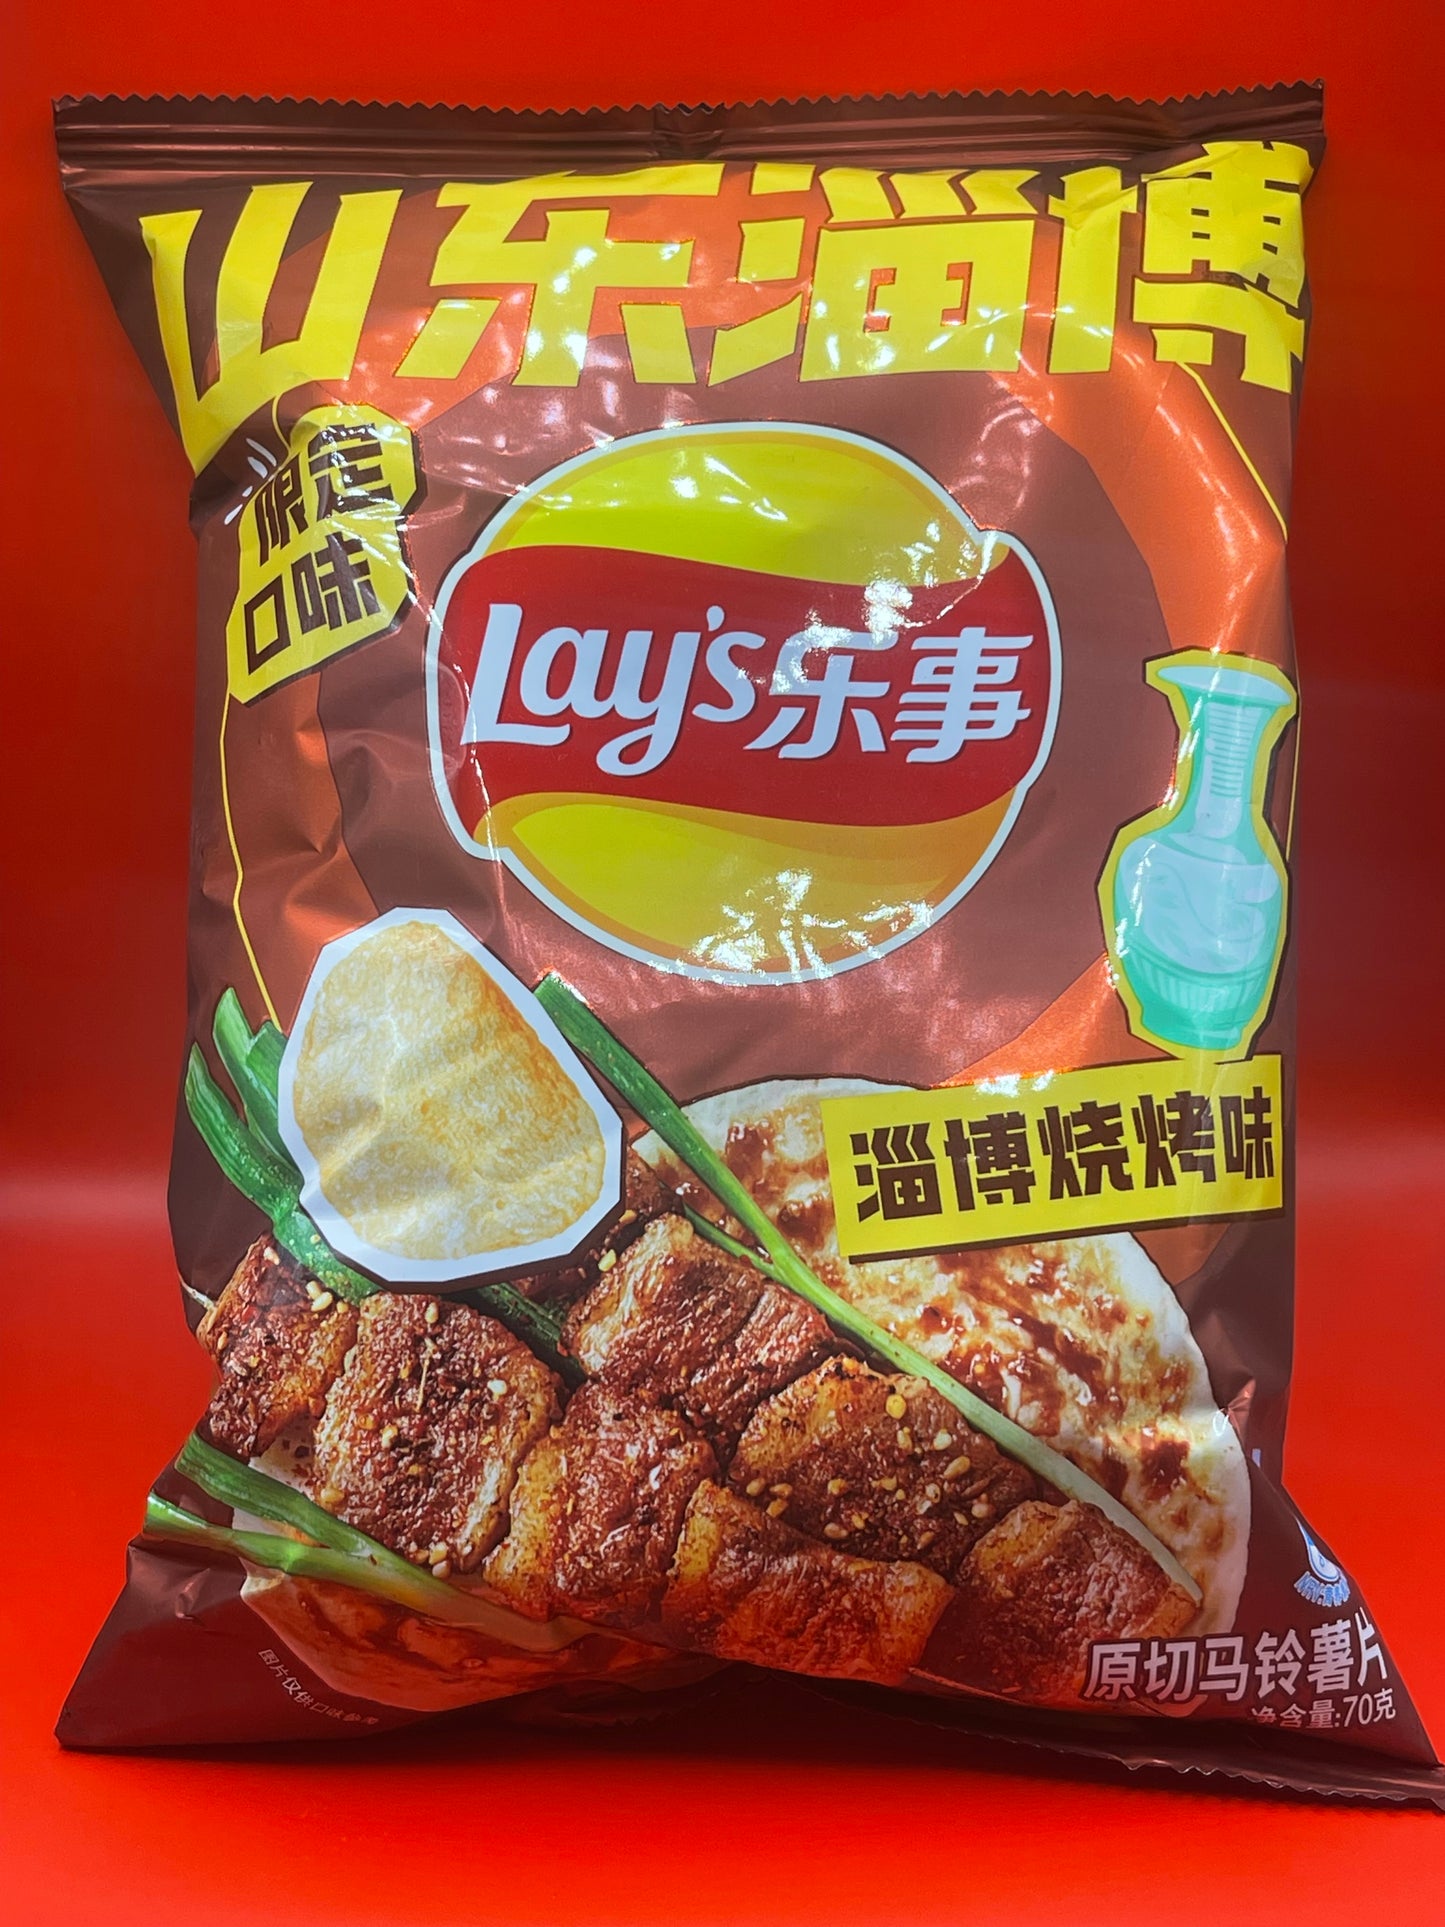 Lay's Chips LIMITED EDITION BBQ Chicken Flavor (China)